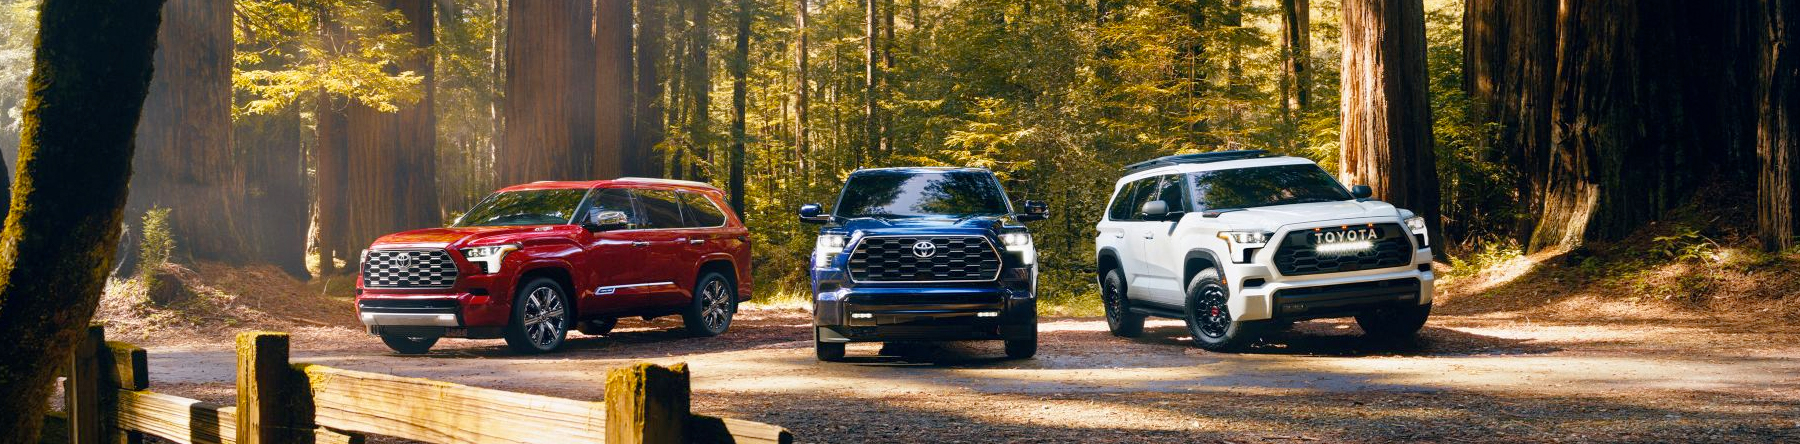 Sequoia SUV Lineup